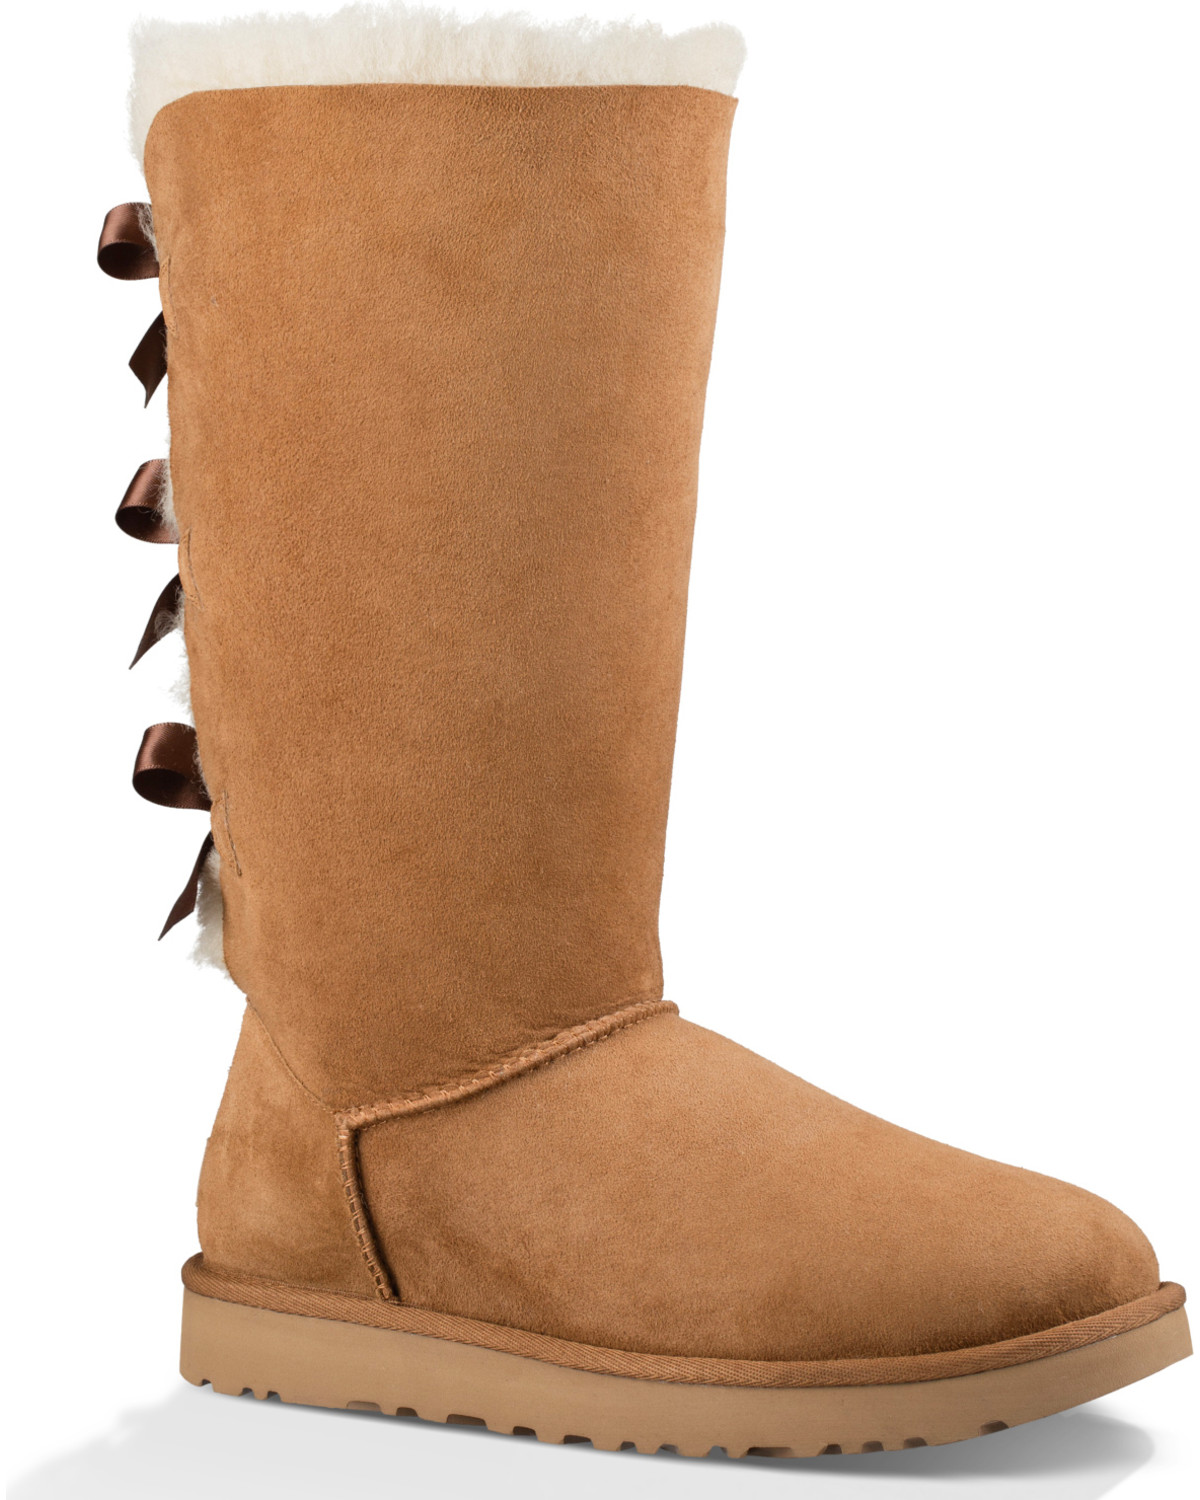 tall ugg boots with bows